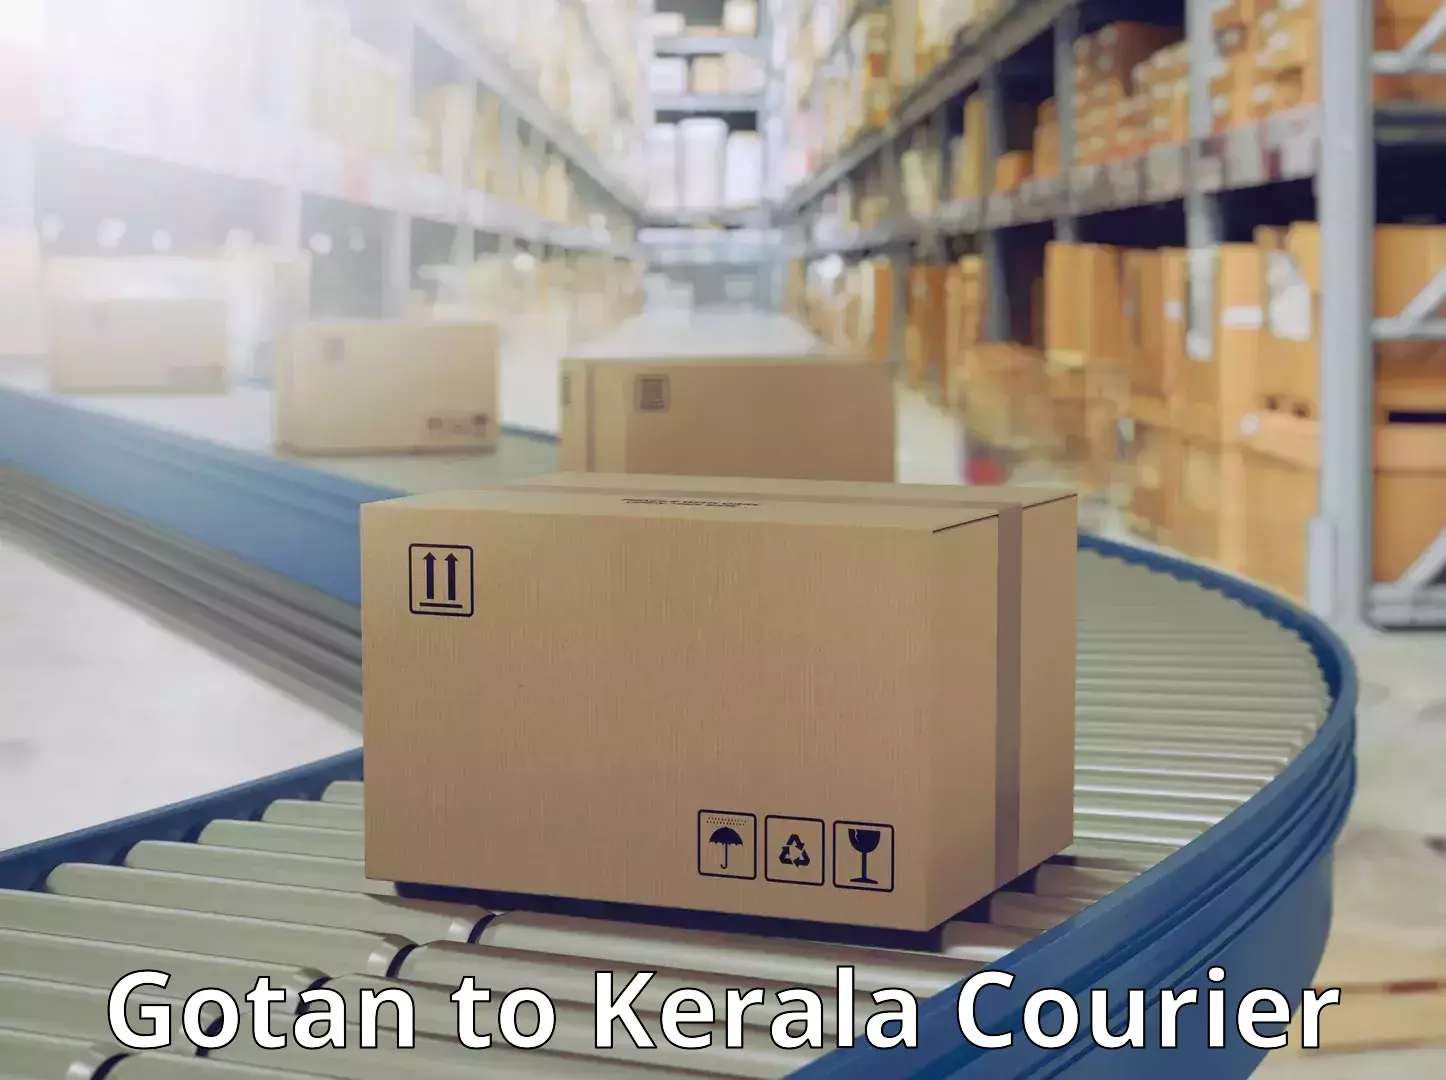 Reliable delivery network Gotan to Kerala